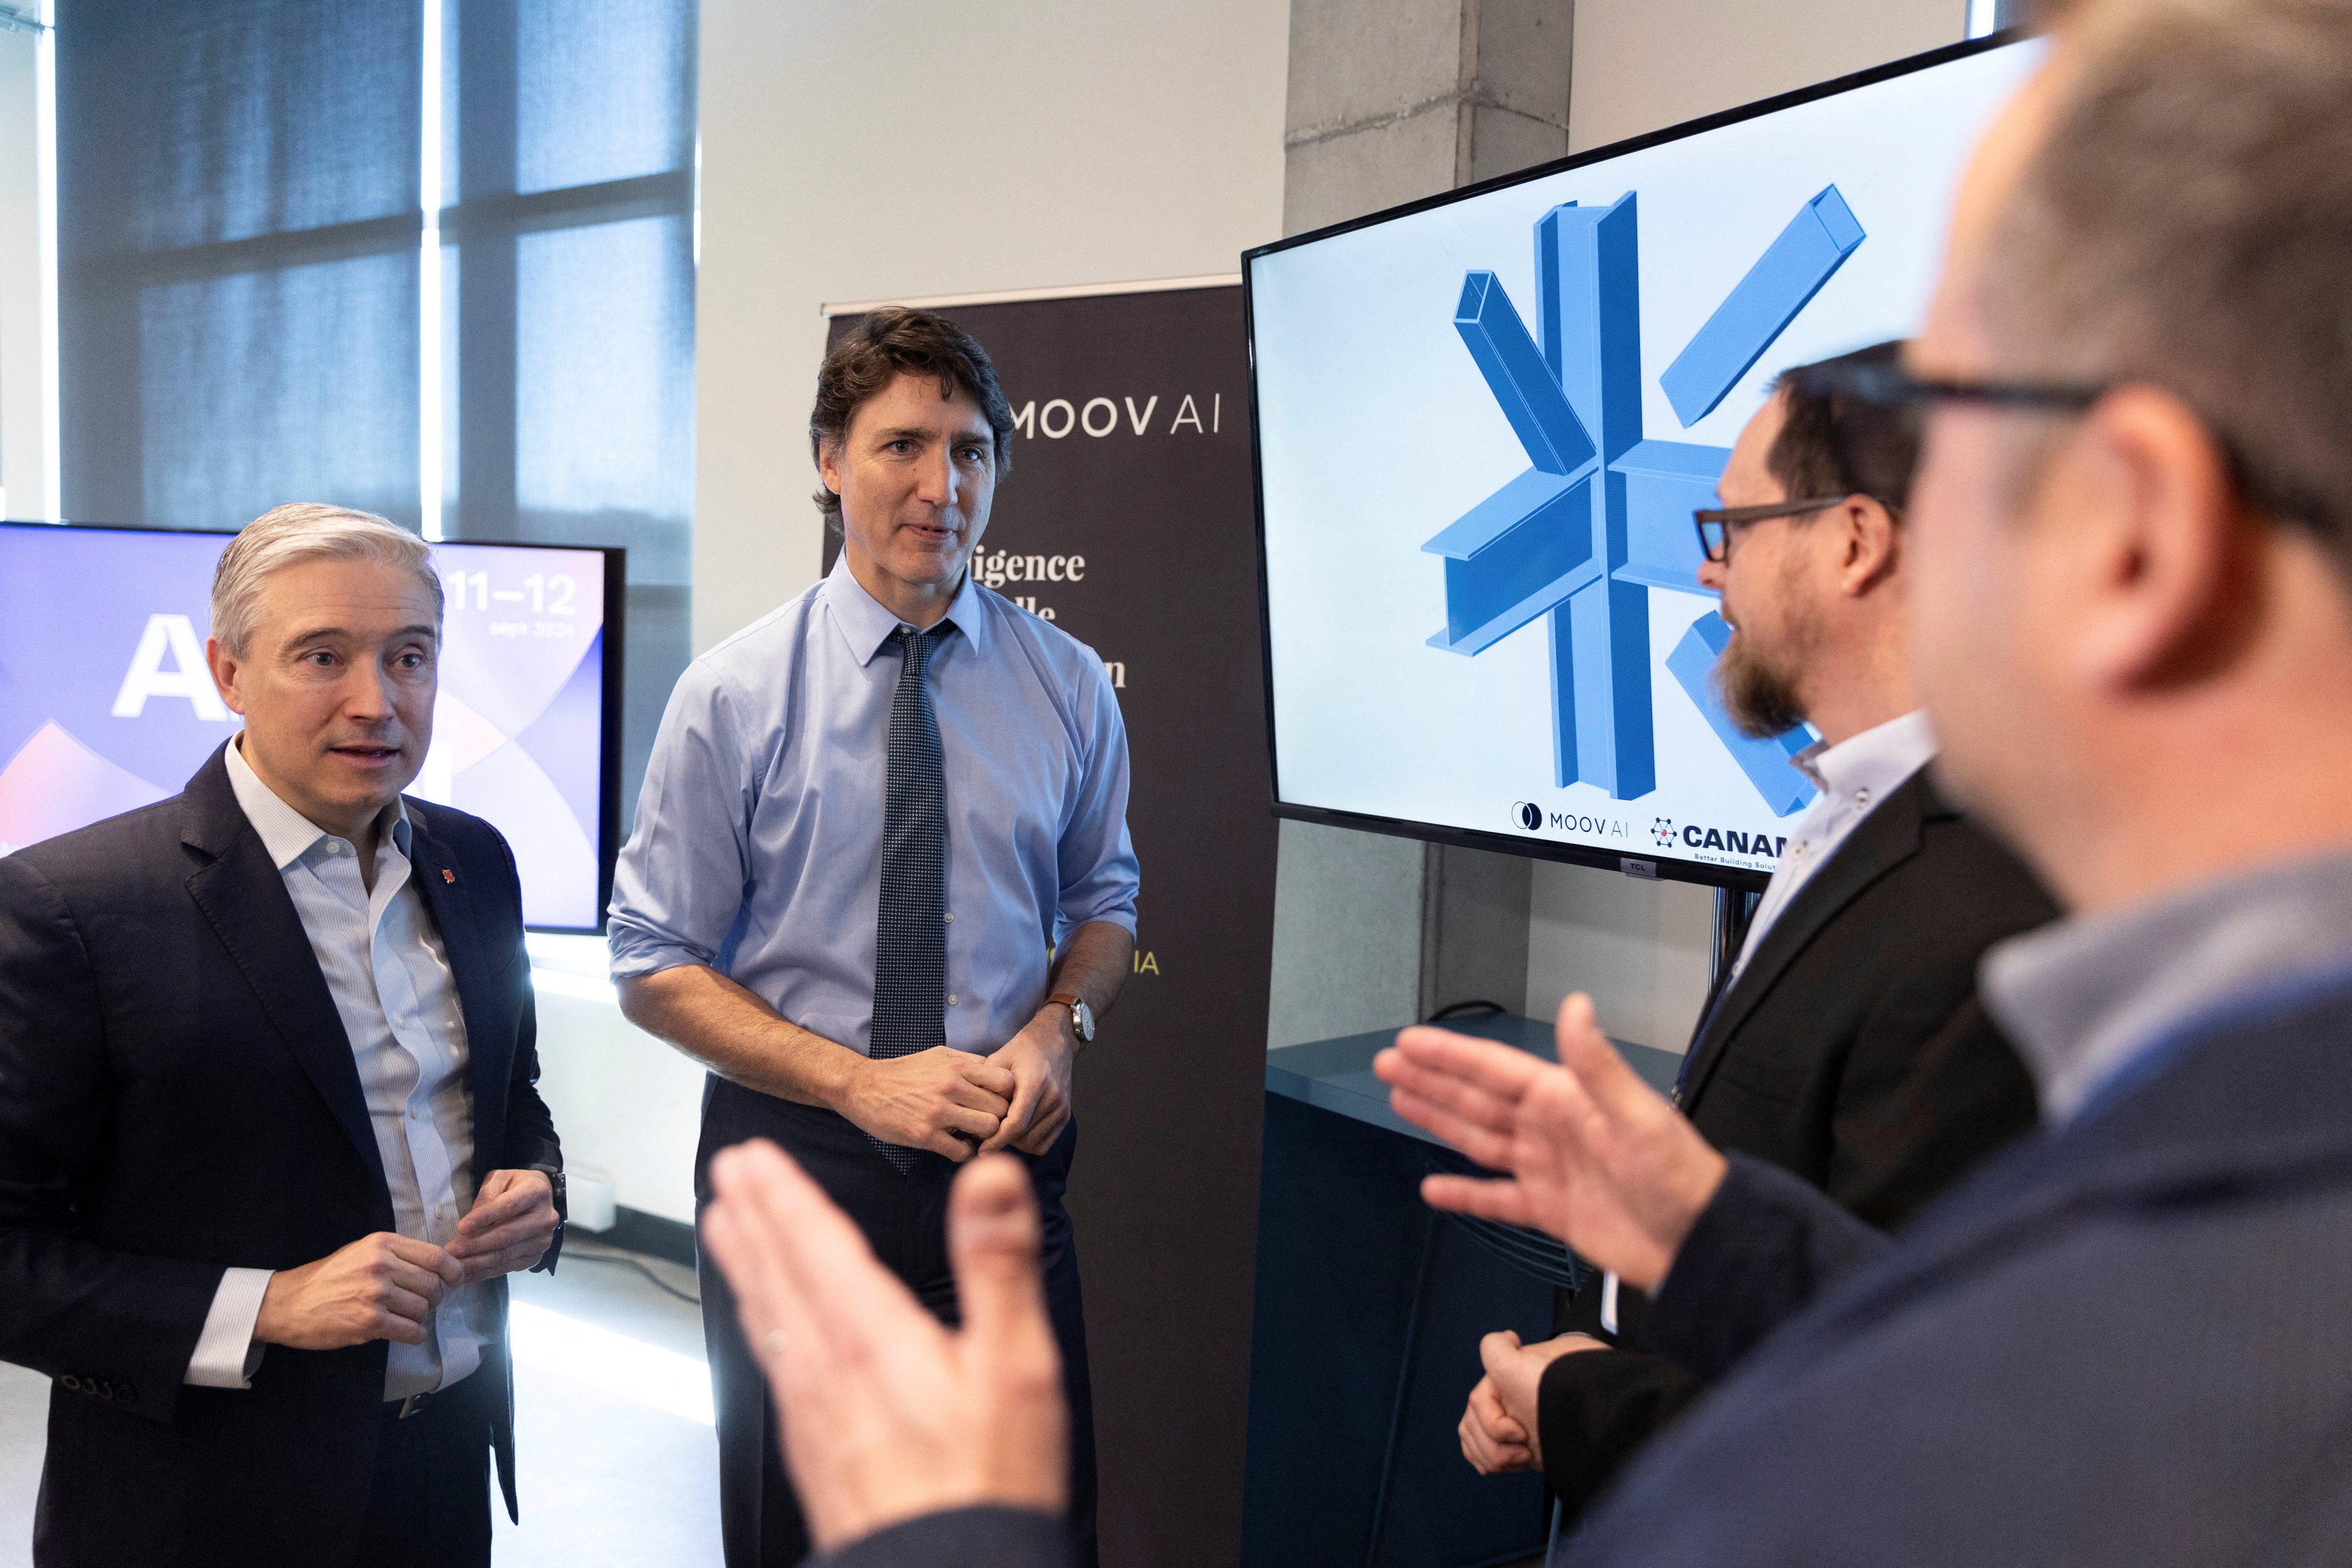 Canada’s Minister of Innovation, Science and Industry, Francois-Philippe Champagne and Prime Minister Justin Trudeau meet Dominic Danis of Moov AI and Patrick Martin of Canam during a visit to the Scale AI offices in Montreal, Quebec on Sunday. Photo: Reuters 